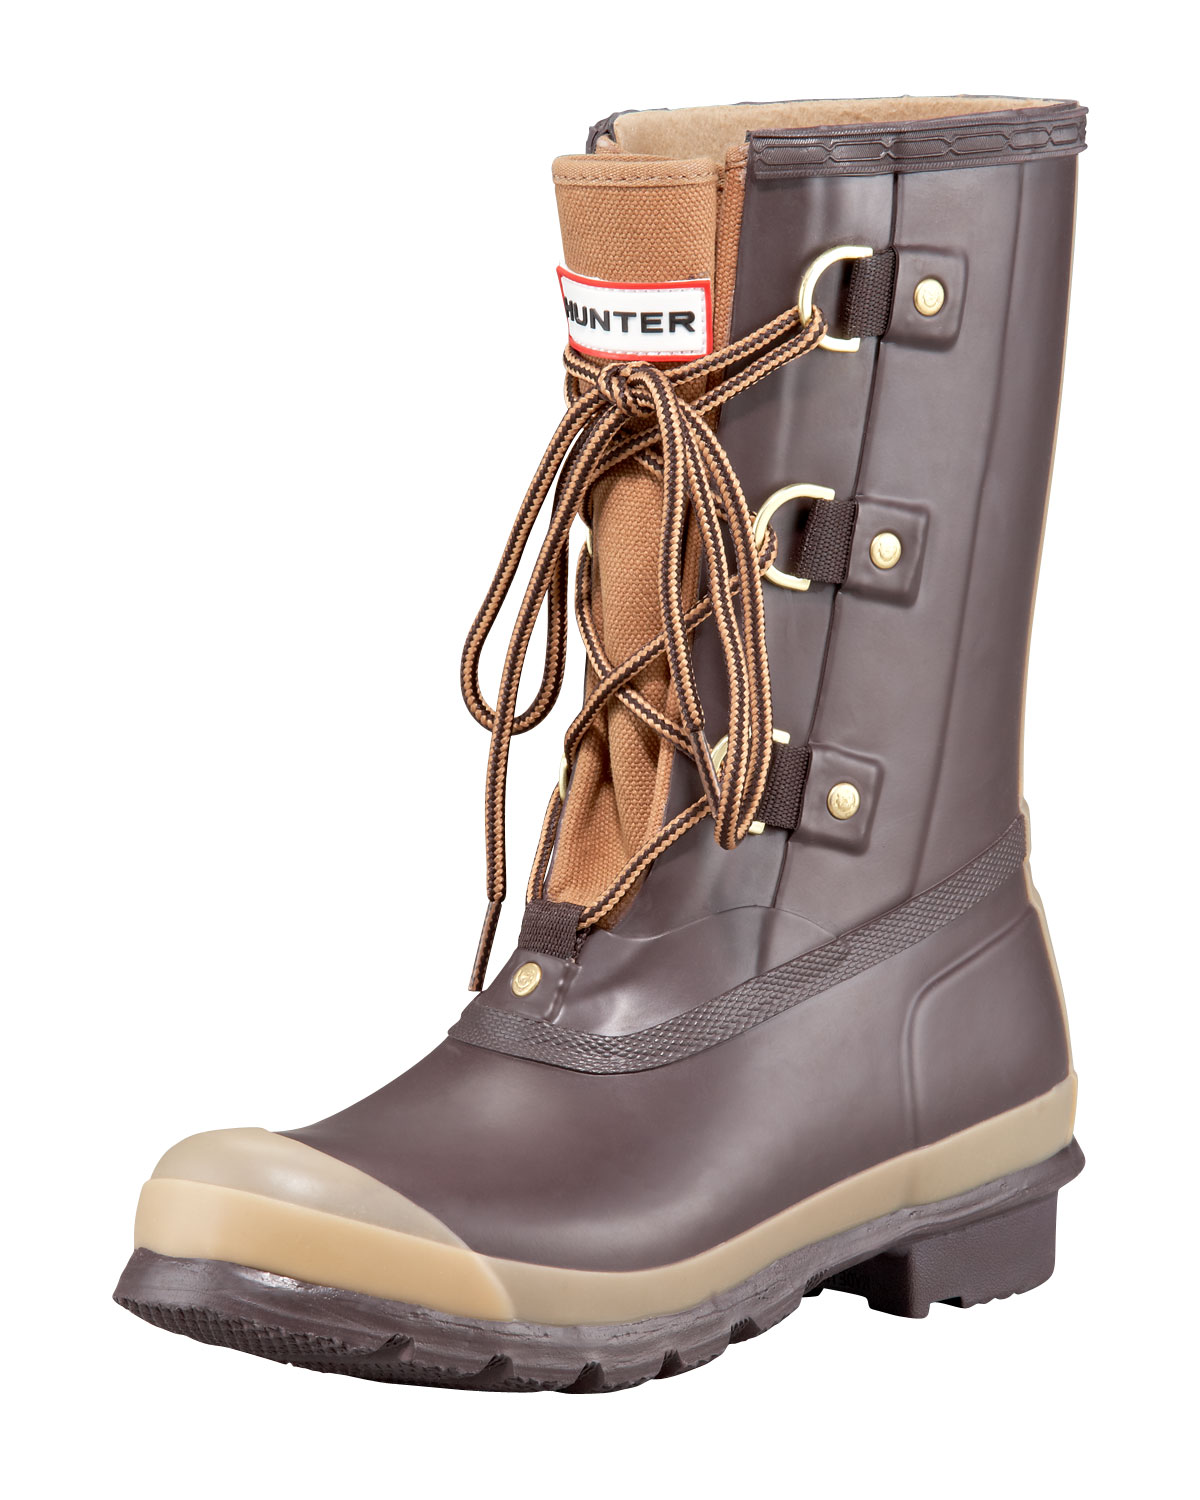 HUNTER Lace-up Short Rain Boot in Brown 